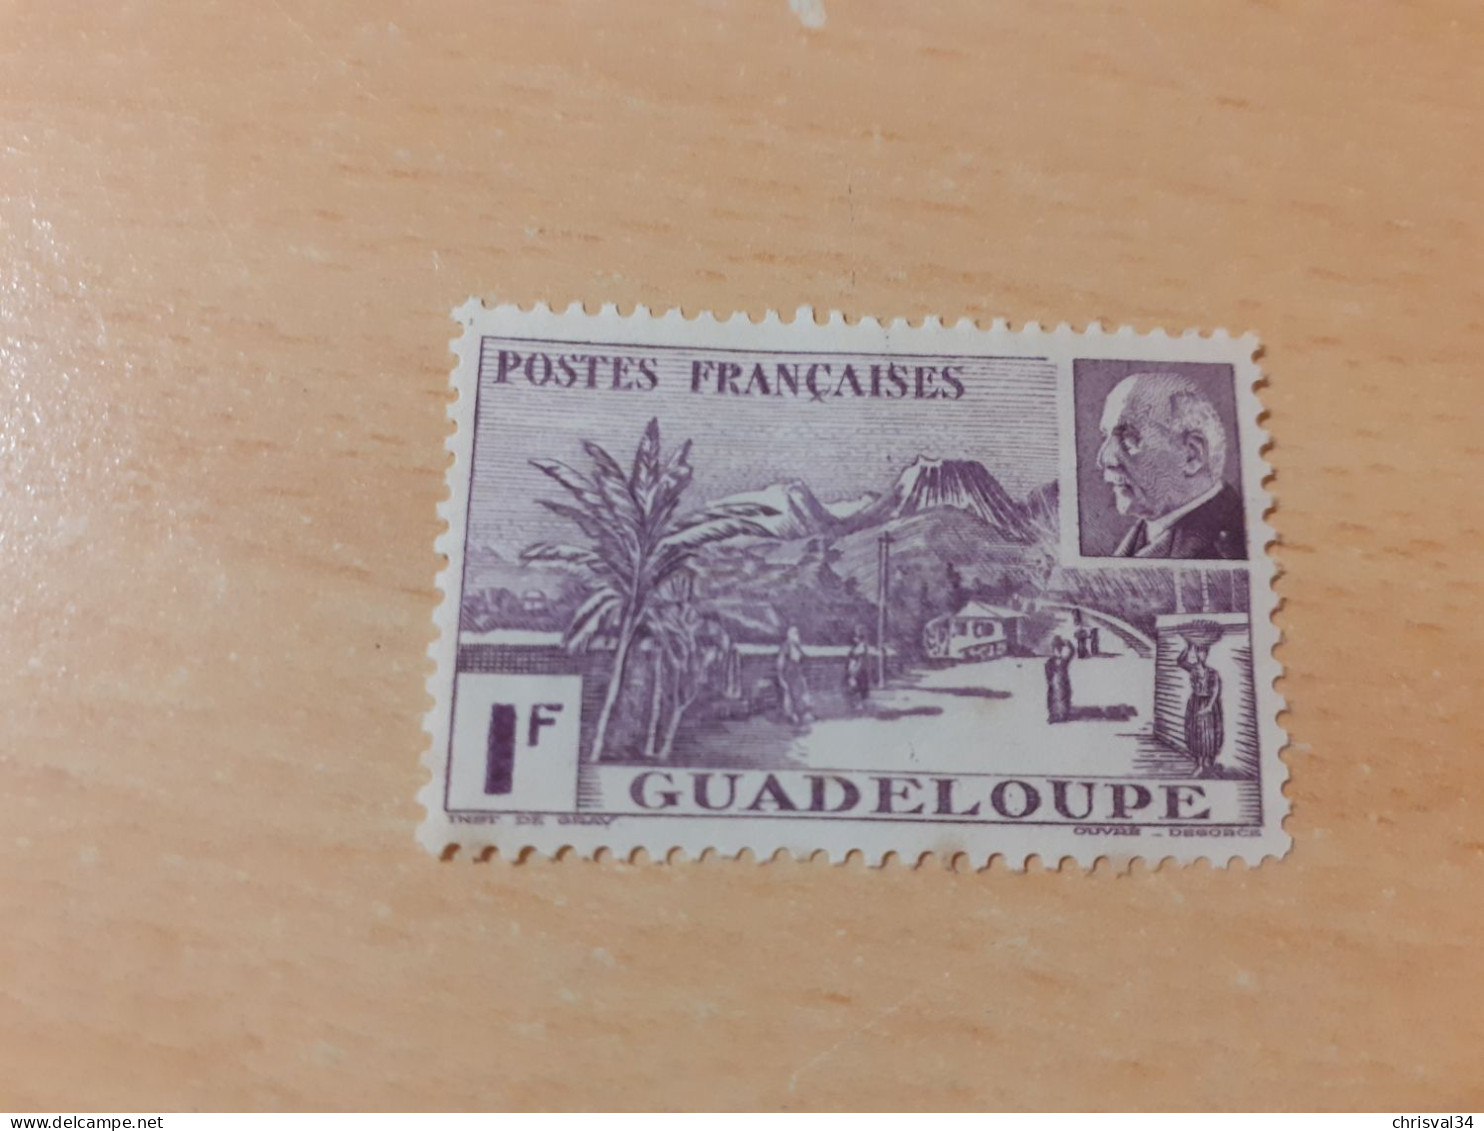 TIMBRE   GUADELOUPE       N  161    COTE  1,00   EUROS  NEUF  SG - Ungebraucht